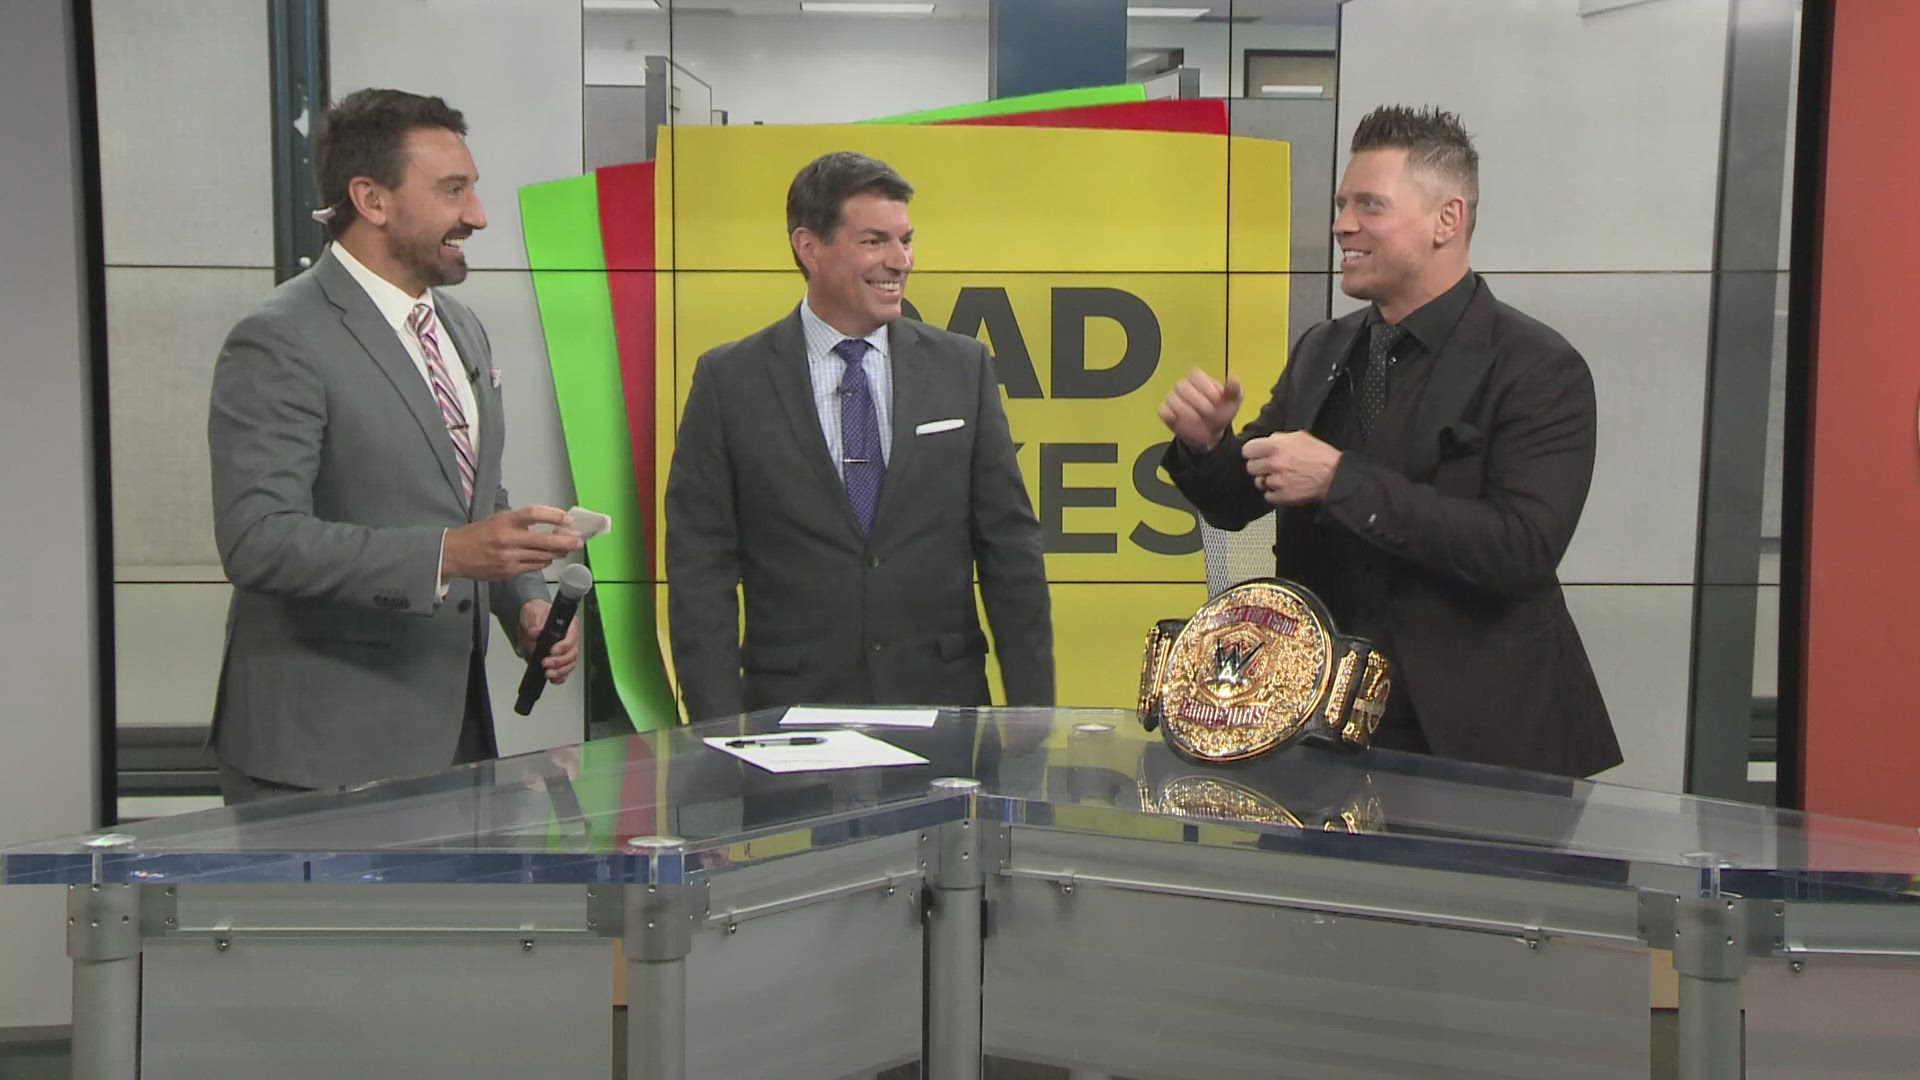 WWE star Mike "The Miz" Mizanin served as a special guest in today's edition of dad jokes with Matt Wintz and Dave Chudowsky at WKYC in Cleveland.